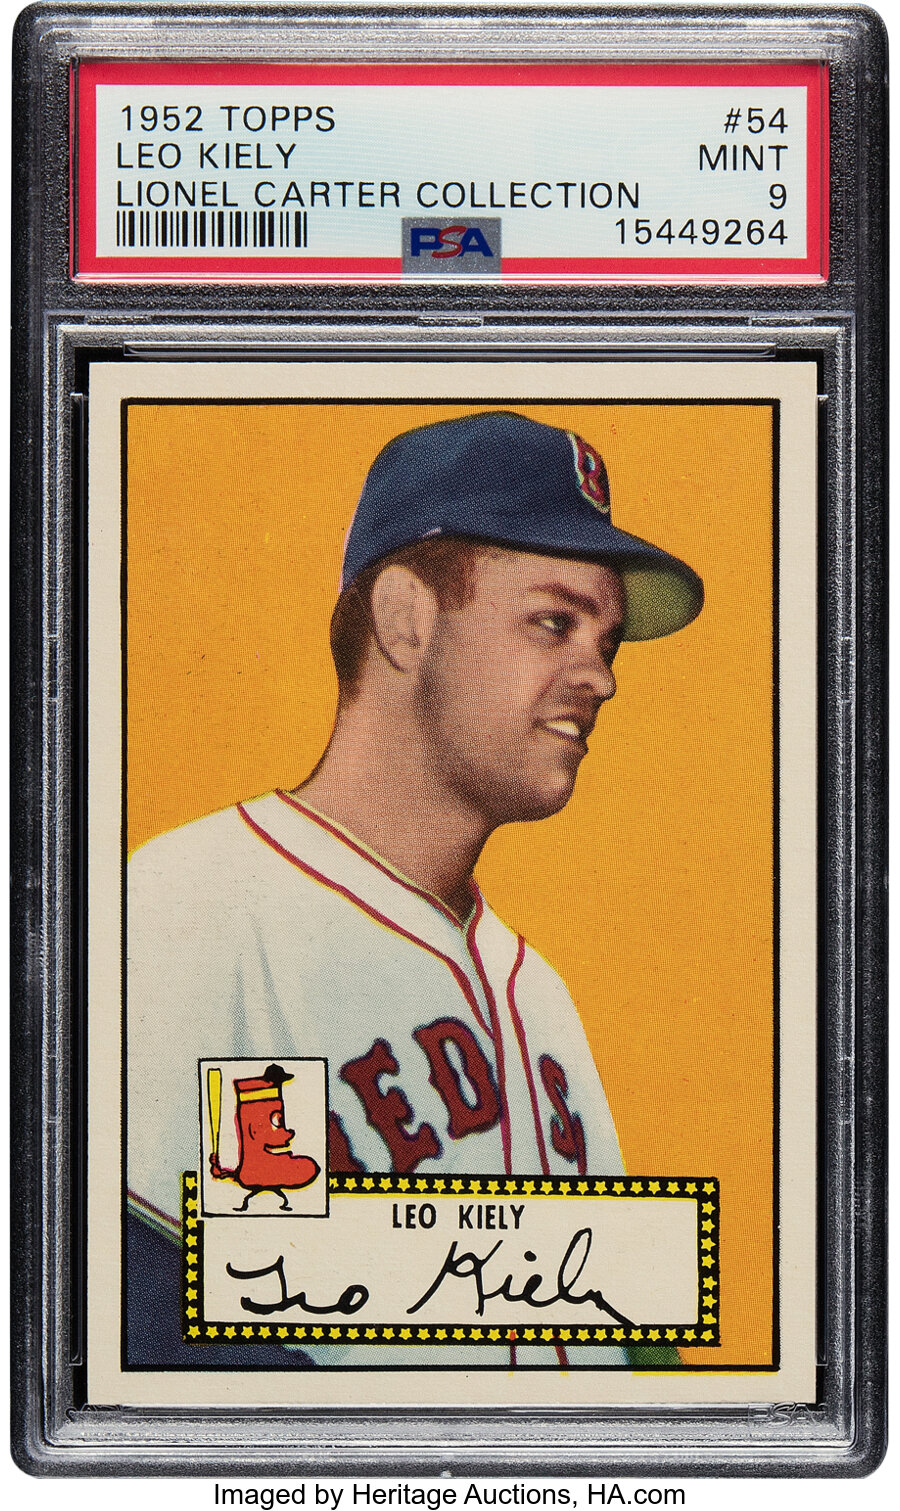 1952 Topps Leo Kiely (Black Back) #54 PSA Mint 9 - Pop Five, None Superior! From the Lionel Carter Collection